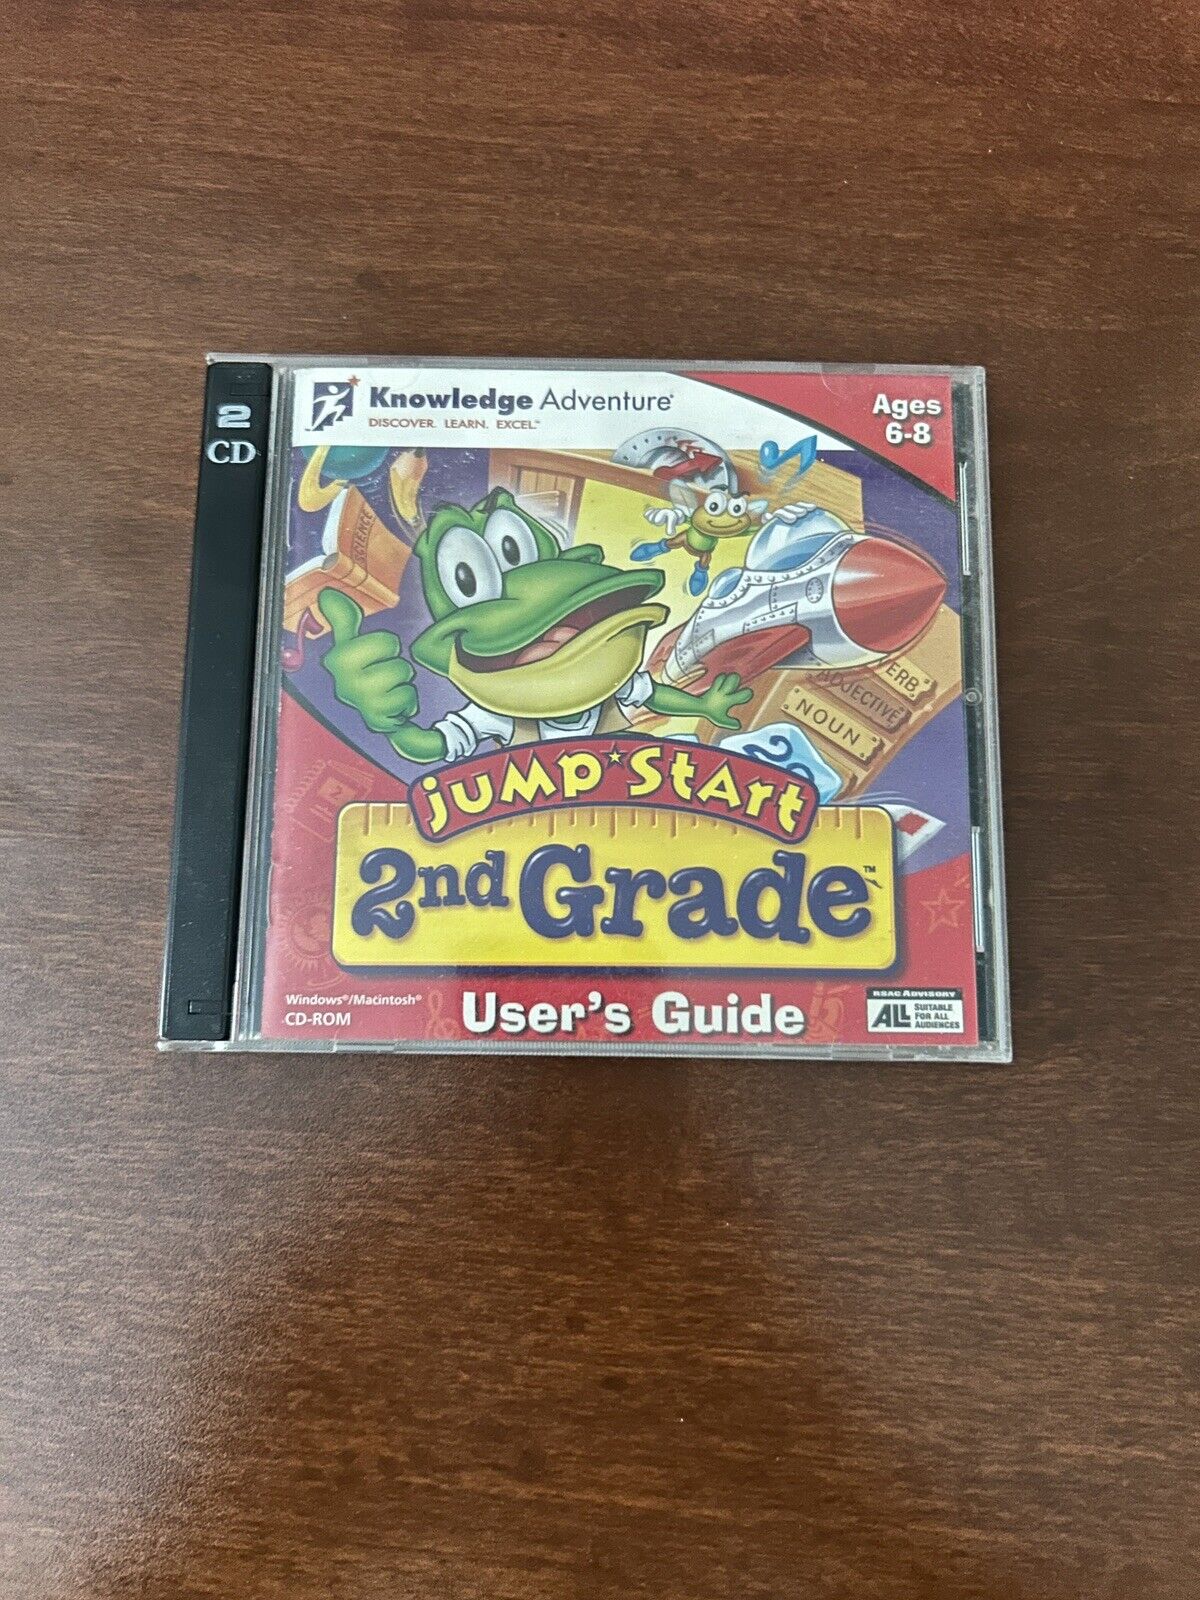 Jump Start: Learning System 2nd Grade PC CD-ROM (1996, Knowledge Adventure)